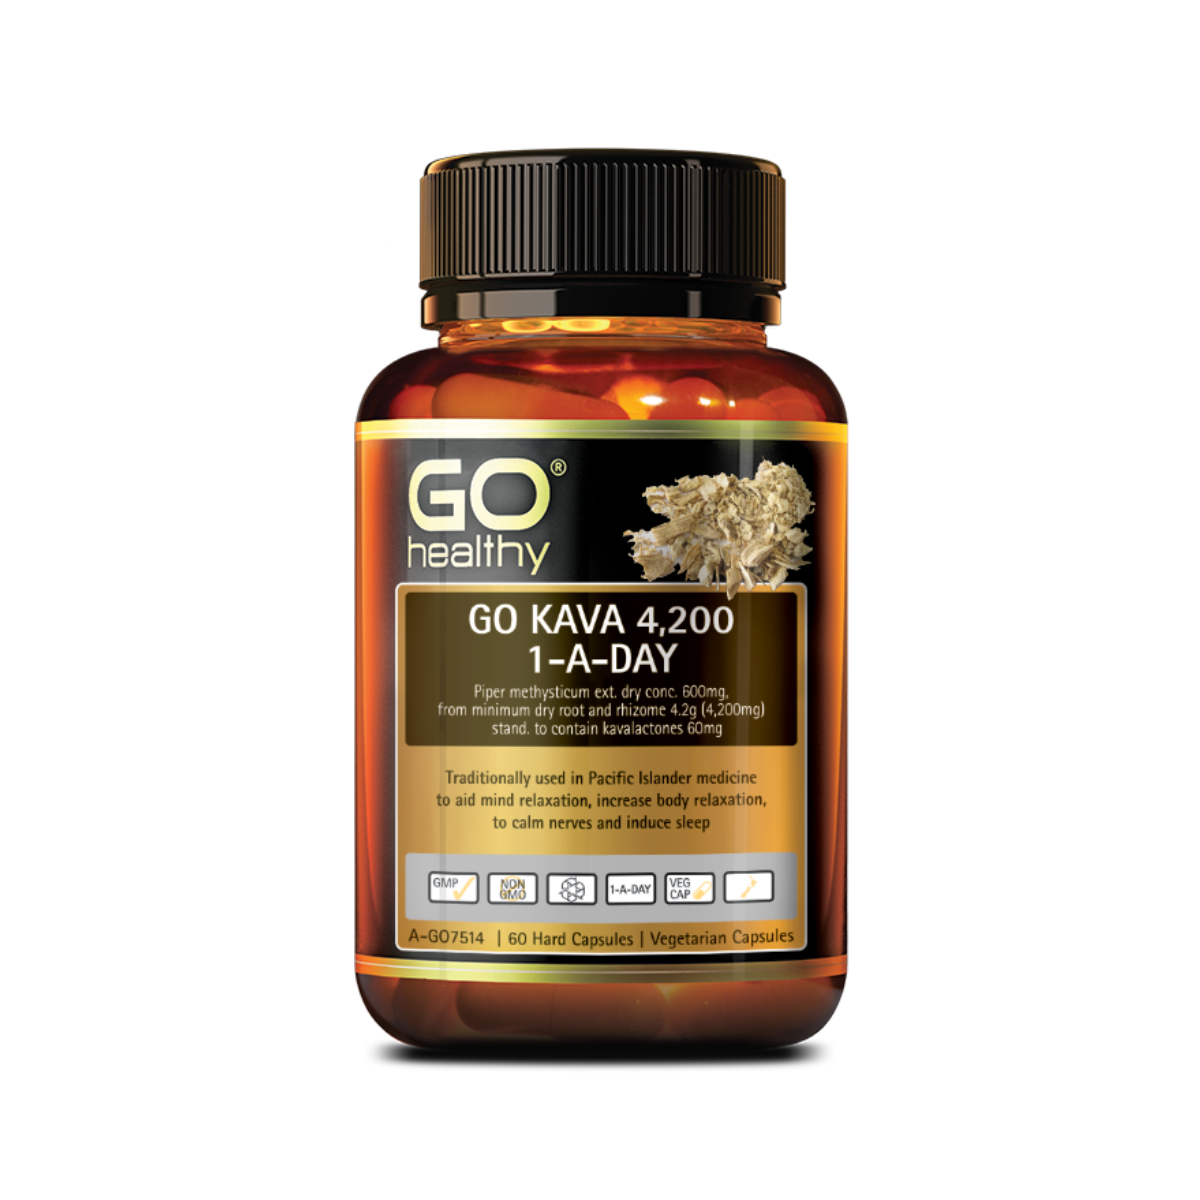 GO Healthy Kava 4,200 1-A-DAY 60 Capsules